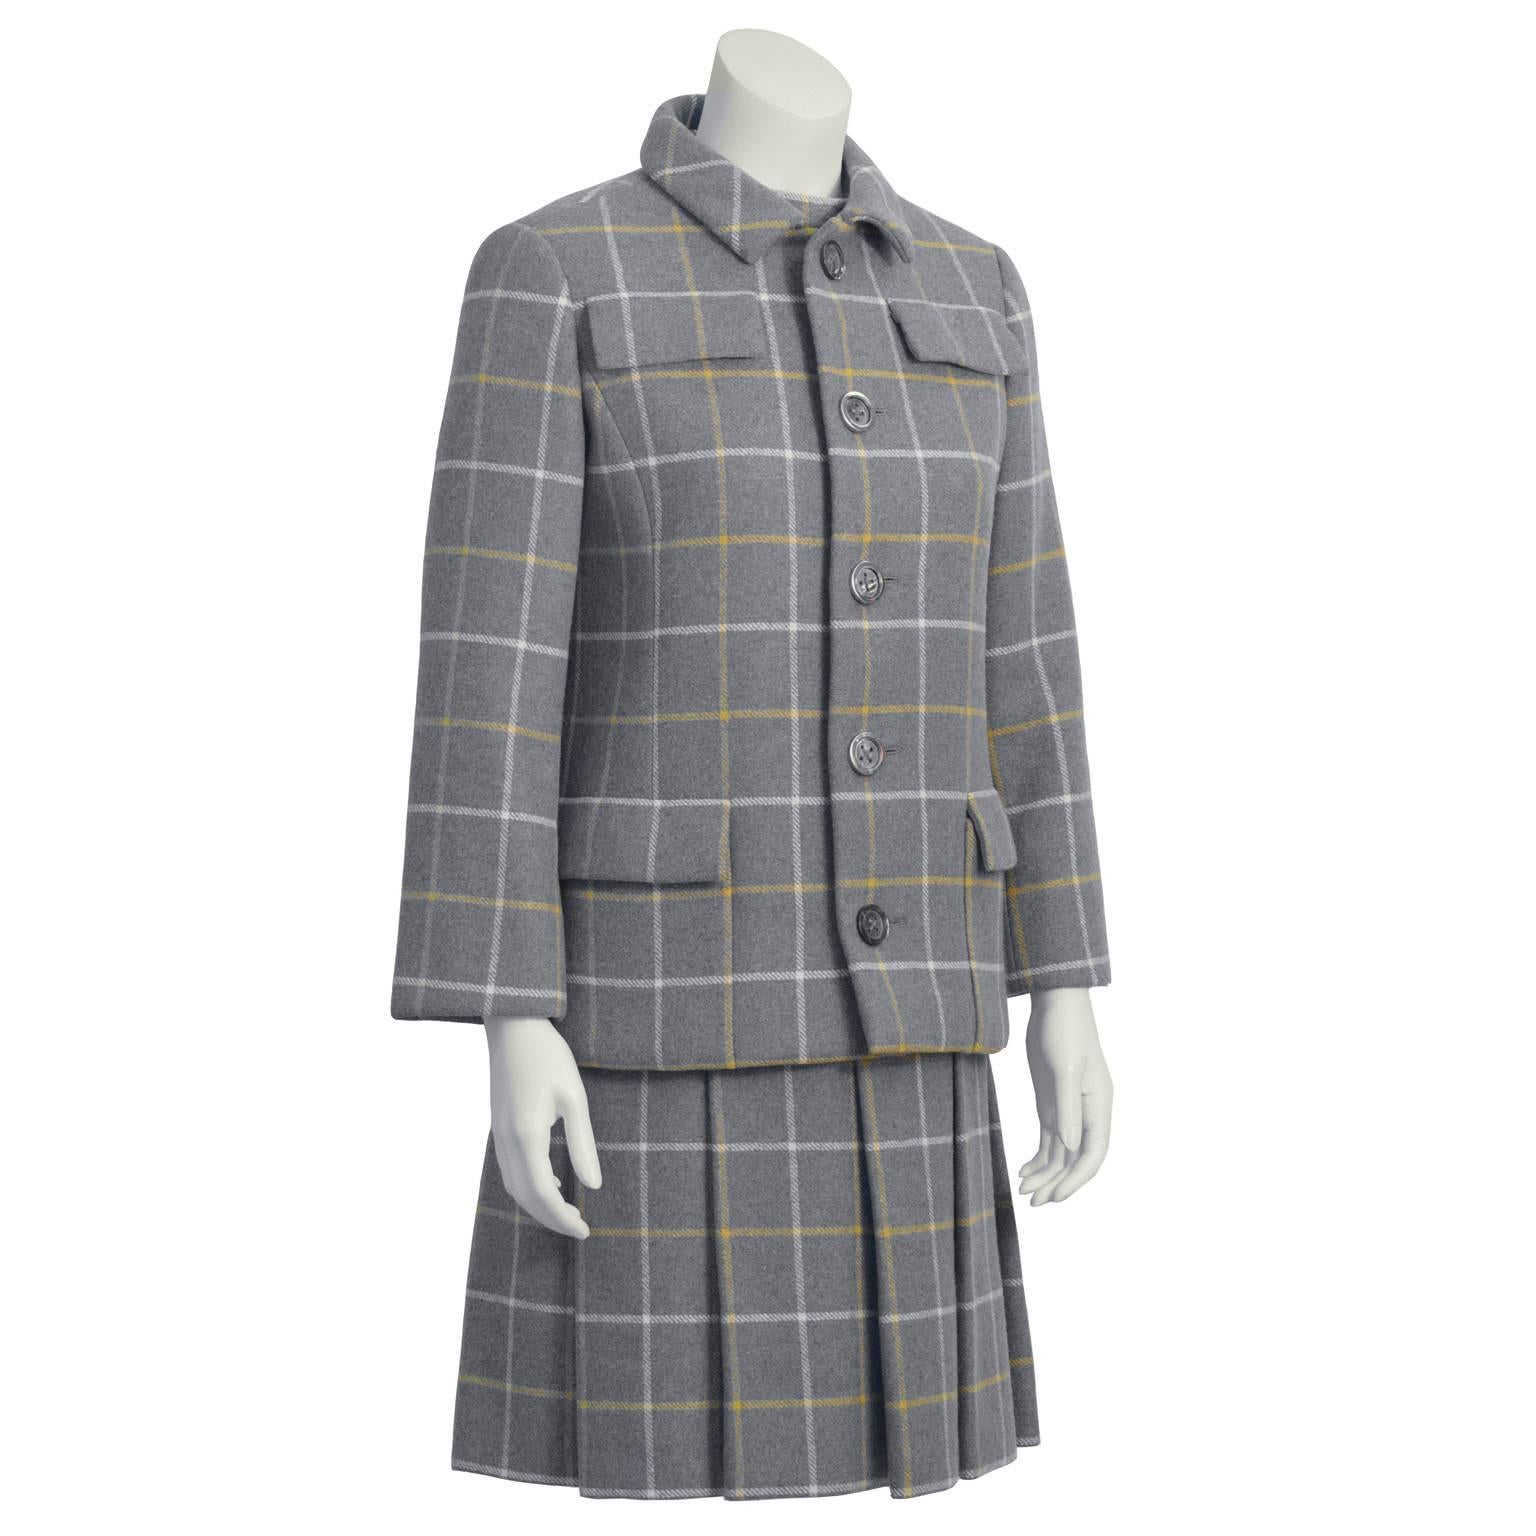 Chic 1960's grey windowpane wool dress and jacket duo features a sleeveless band neck dress with two vertical slit pockets at the waist and a box pleated drop waist skirt. Jacket has flap pockets at each breast and patch pockets at the hips. Front